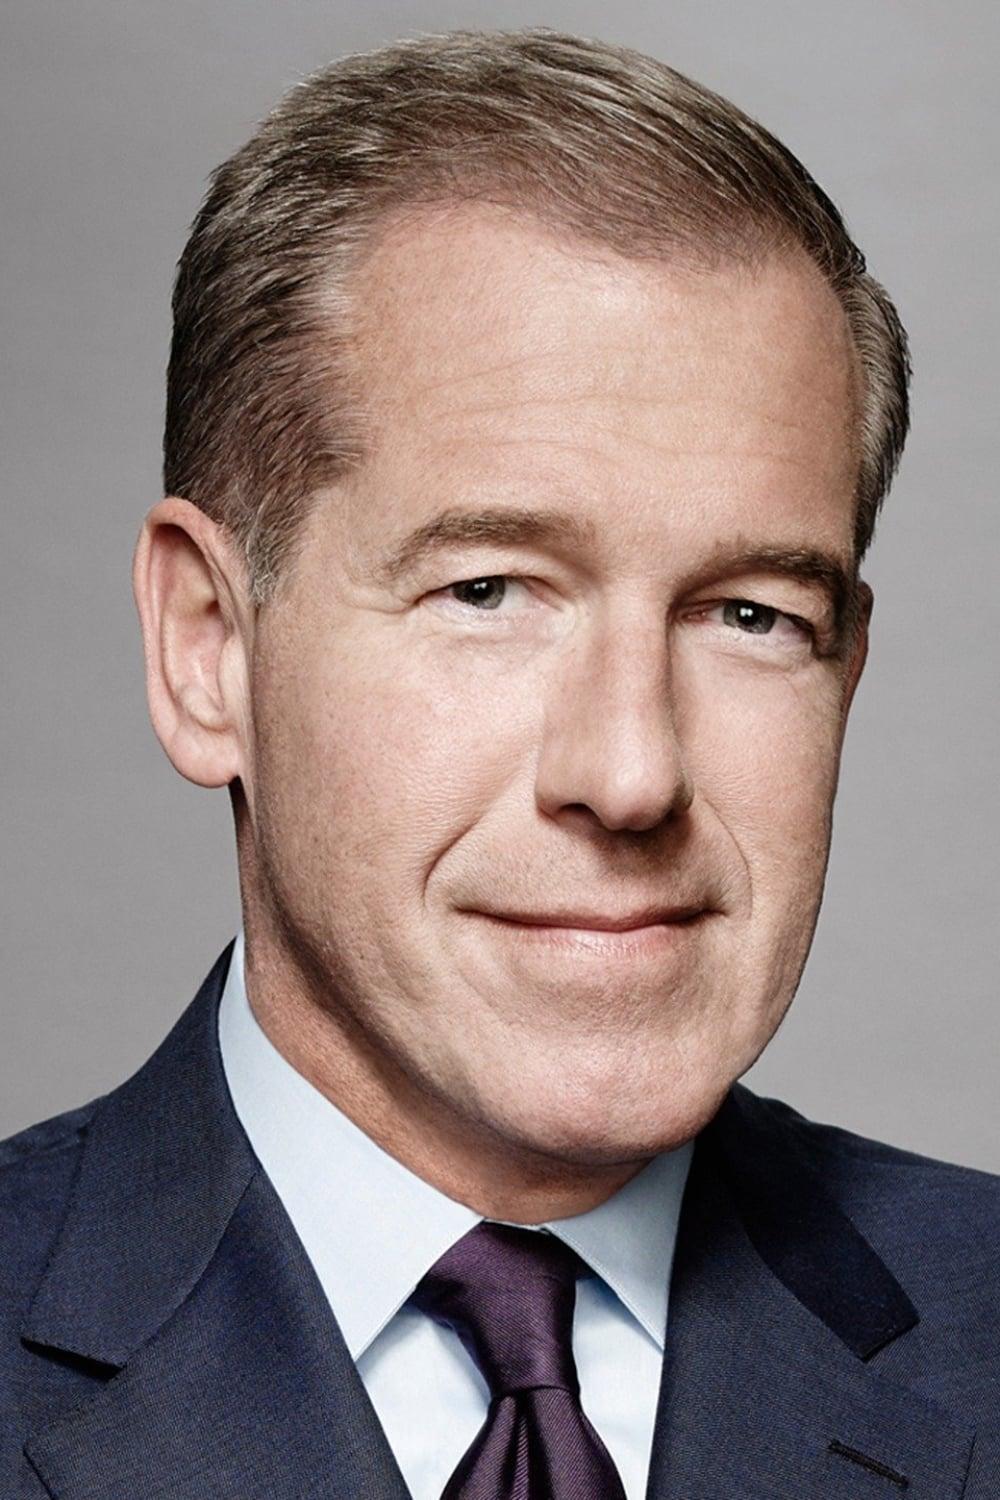 Brian Williams | Self (archive footage)